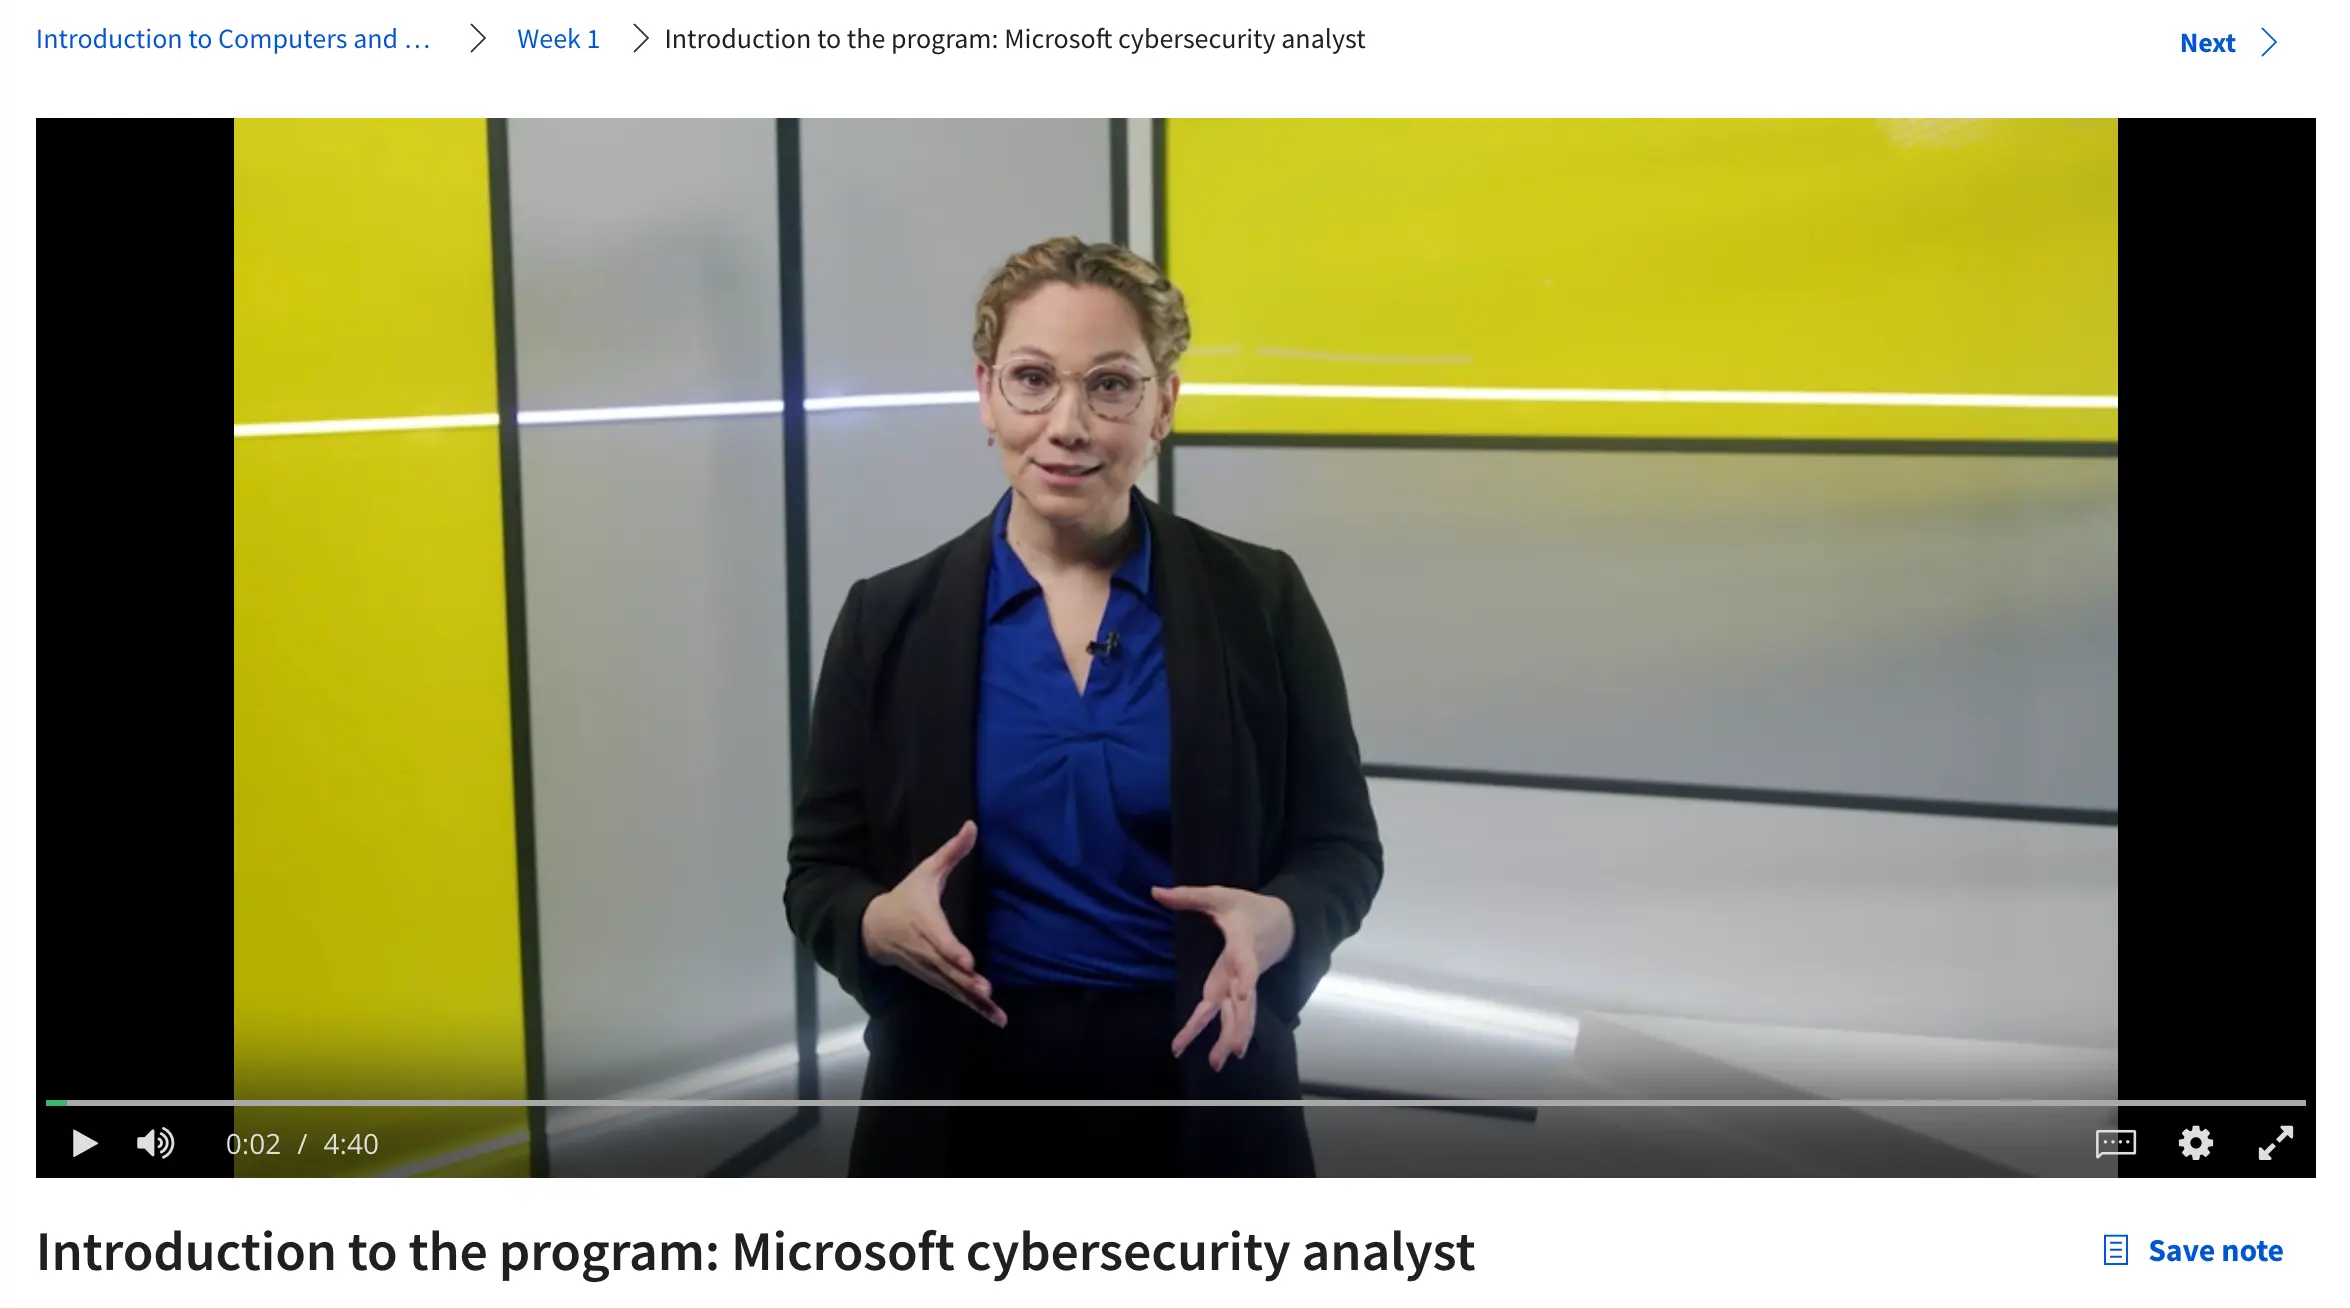 Microsoft Cybersecurity Analyst Certificate - Introduction